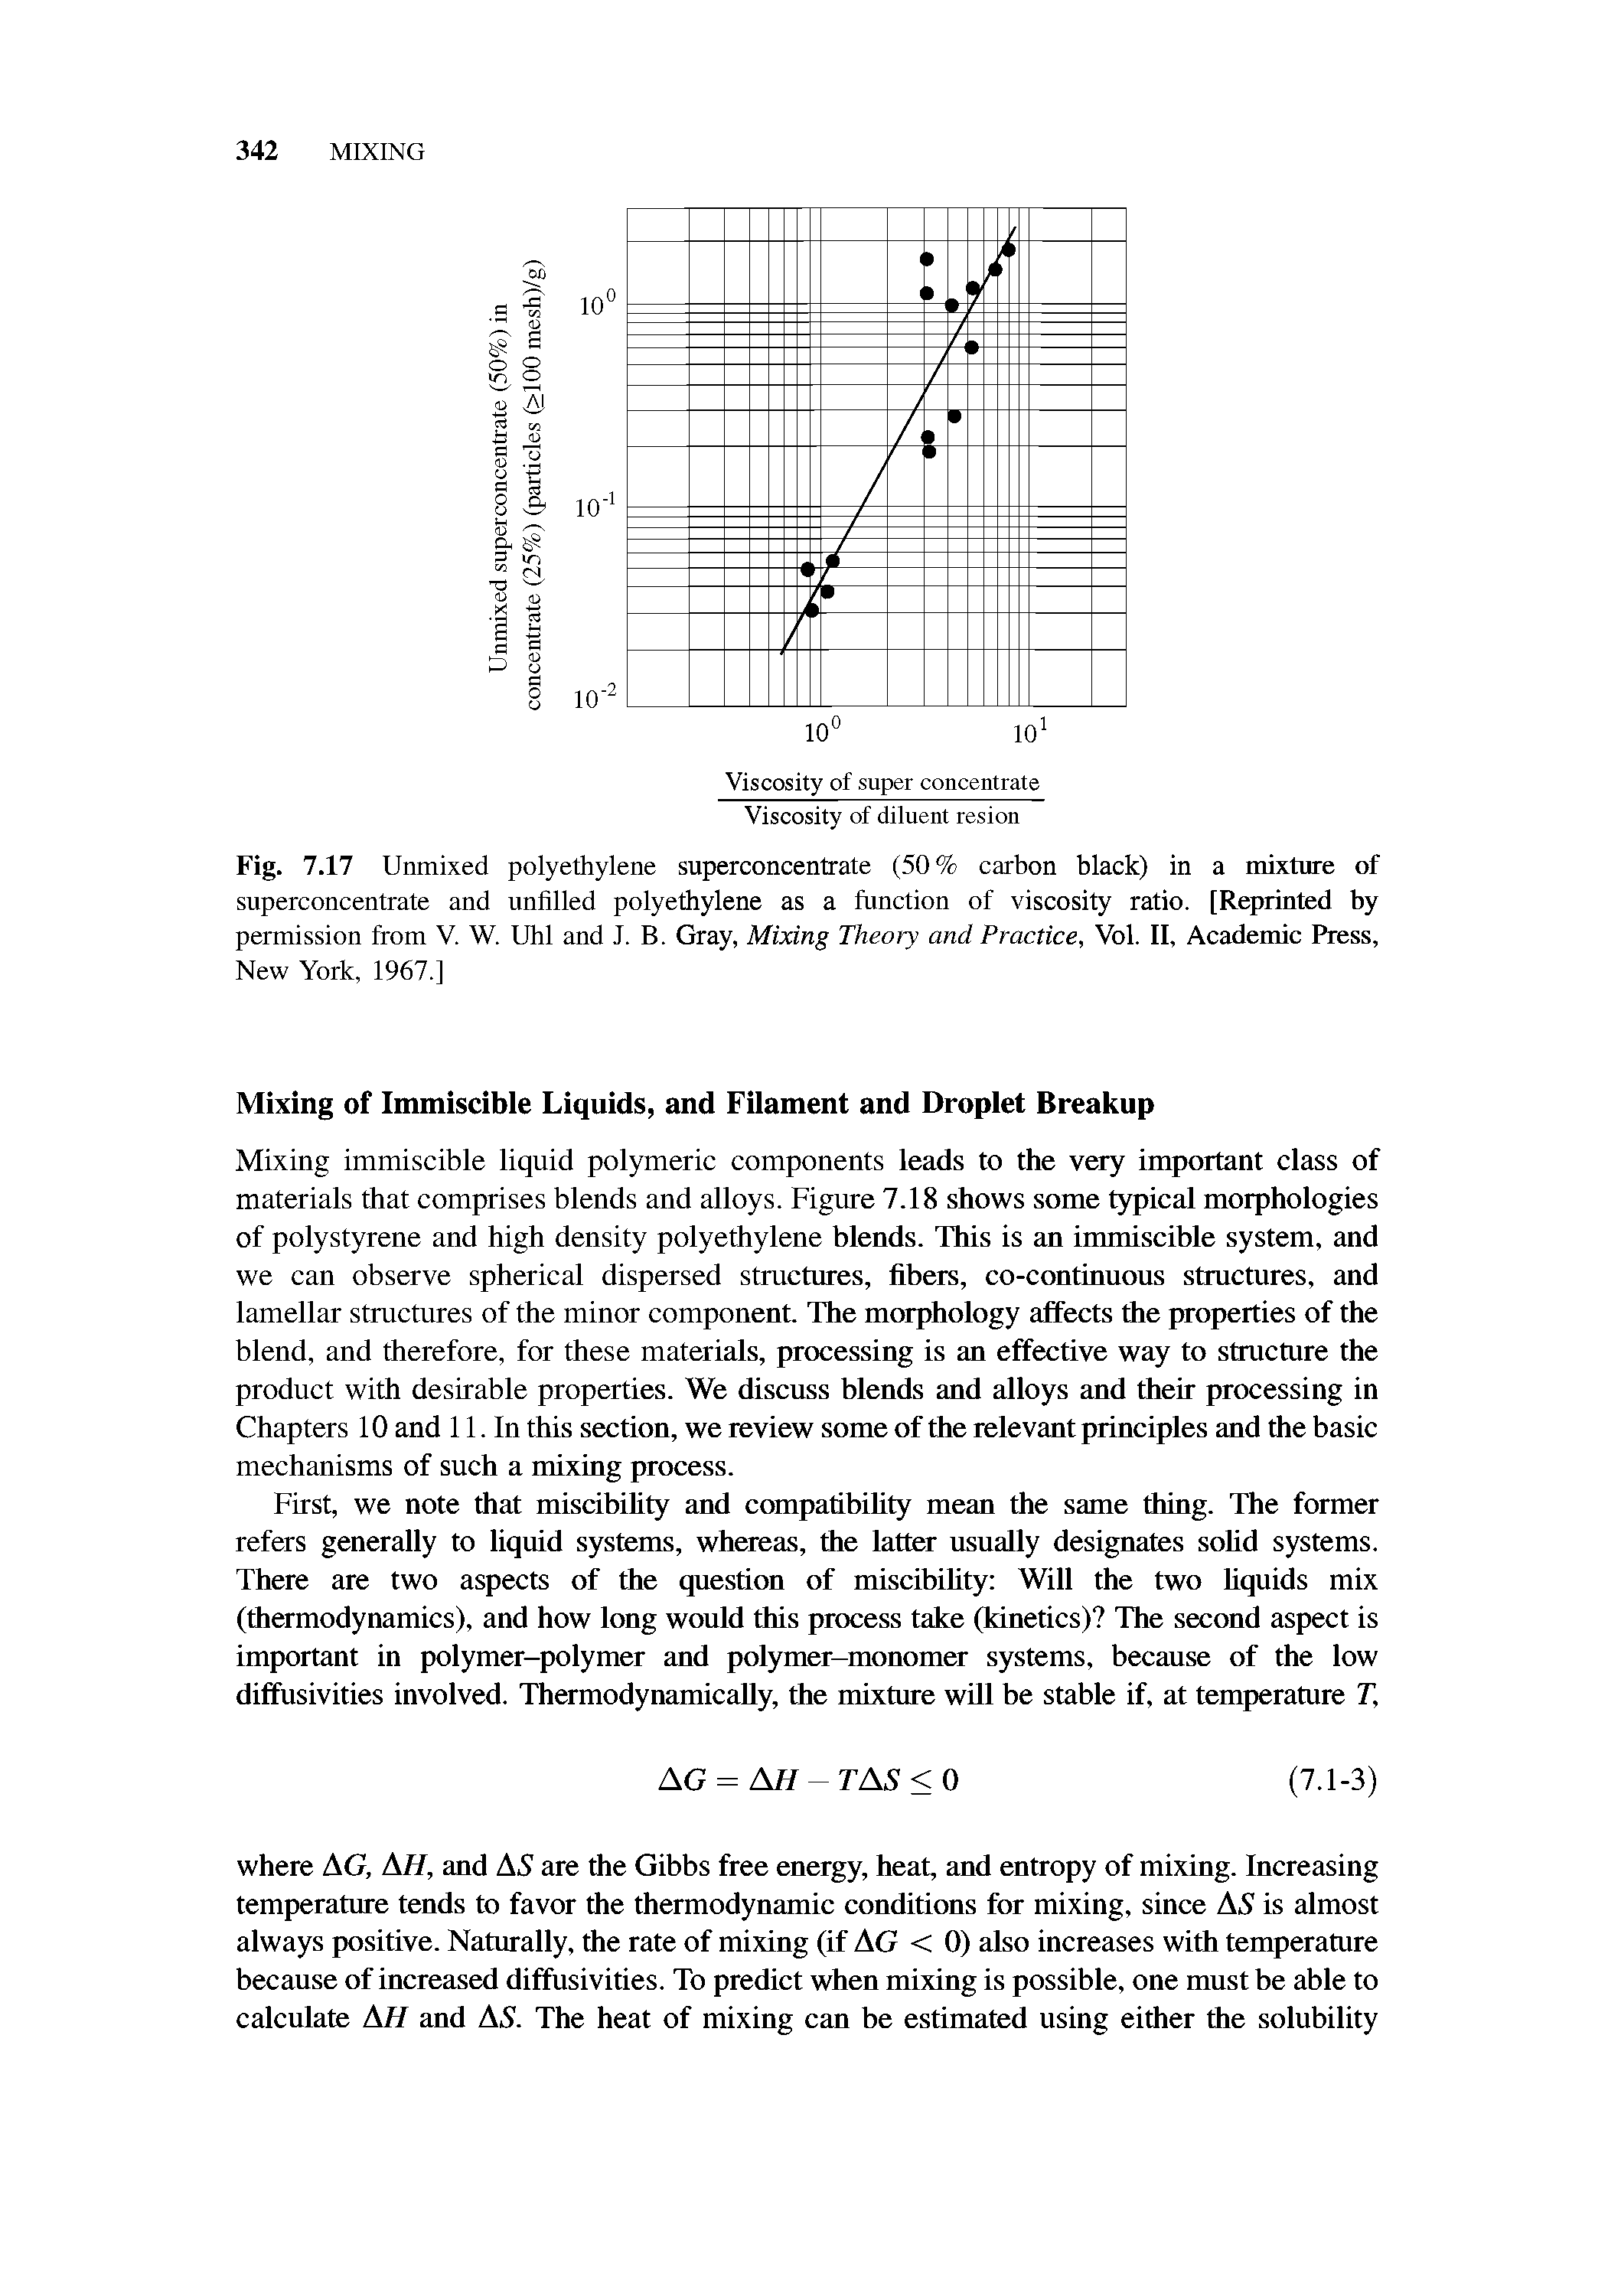 Fig. 7.17 Unmixed polyethylene superconcentrate (50% carbon black) in a mixture of superconcentrate and unfilled polyethylene as a function of viscosity ratio. [Reprinted by permission from V. W. Uhl and J. B. Gray, Mixing Theory and Practice, Vol. II, Academic Press, New York, 1967.]...